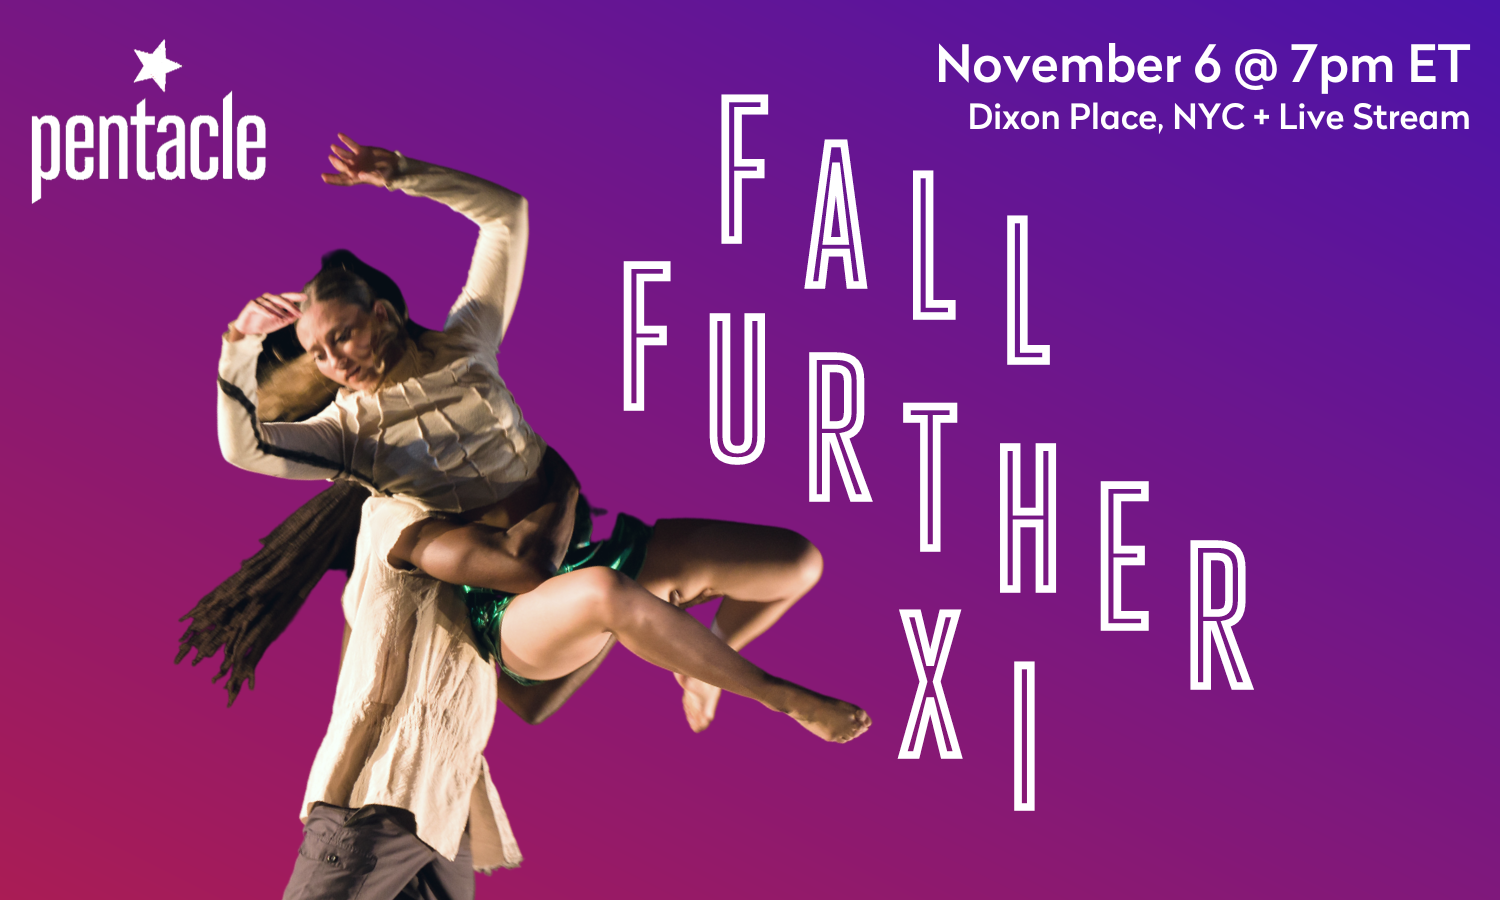 the text "FALL FURTHER XI" displayed in a downward diagonal, with two dancers to the left. One of which is held in the air with her arms and legs splayed as if she's falling.